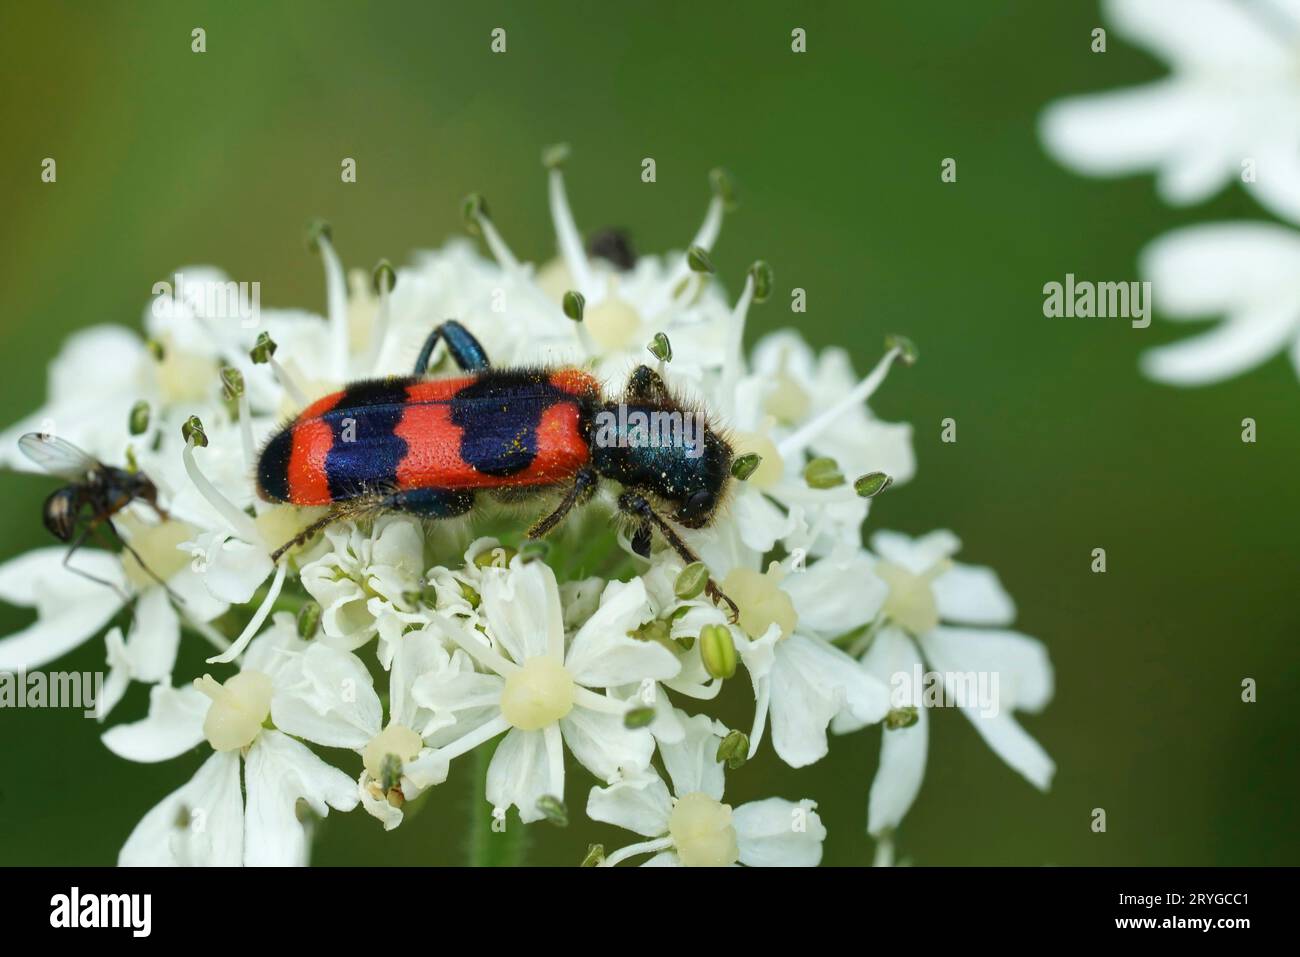 Natural closeup on the hairy, colorful bee-eating beetle, Trichodes apiarius sitting on a white Heracleum flower Stock Photo